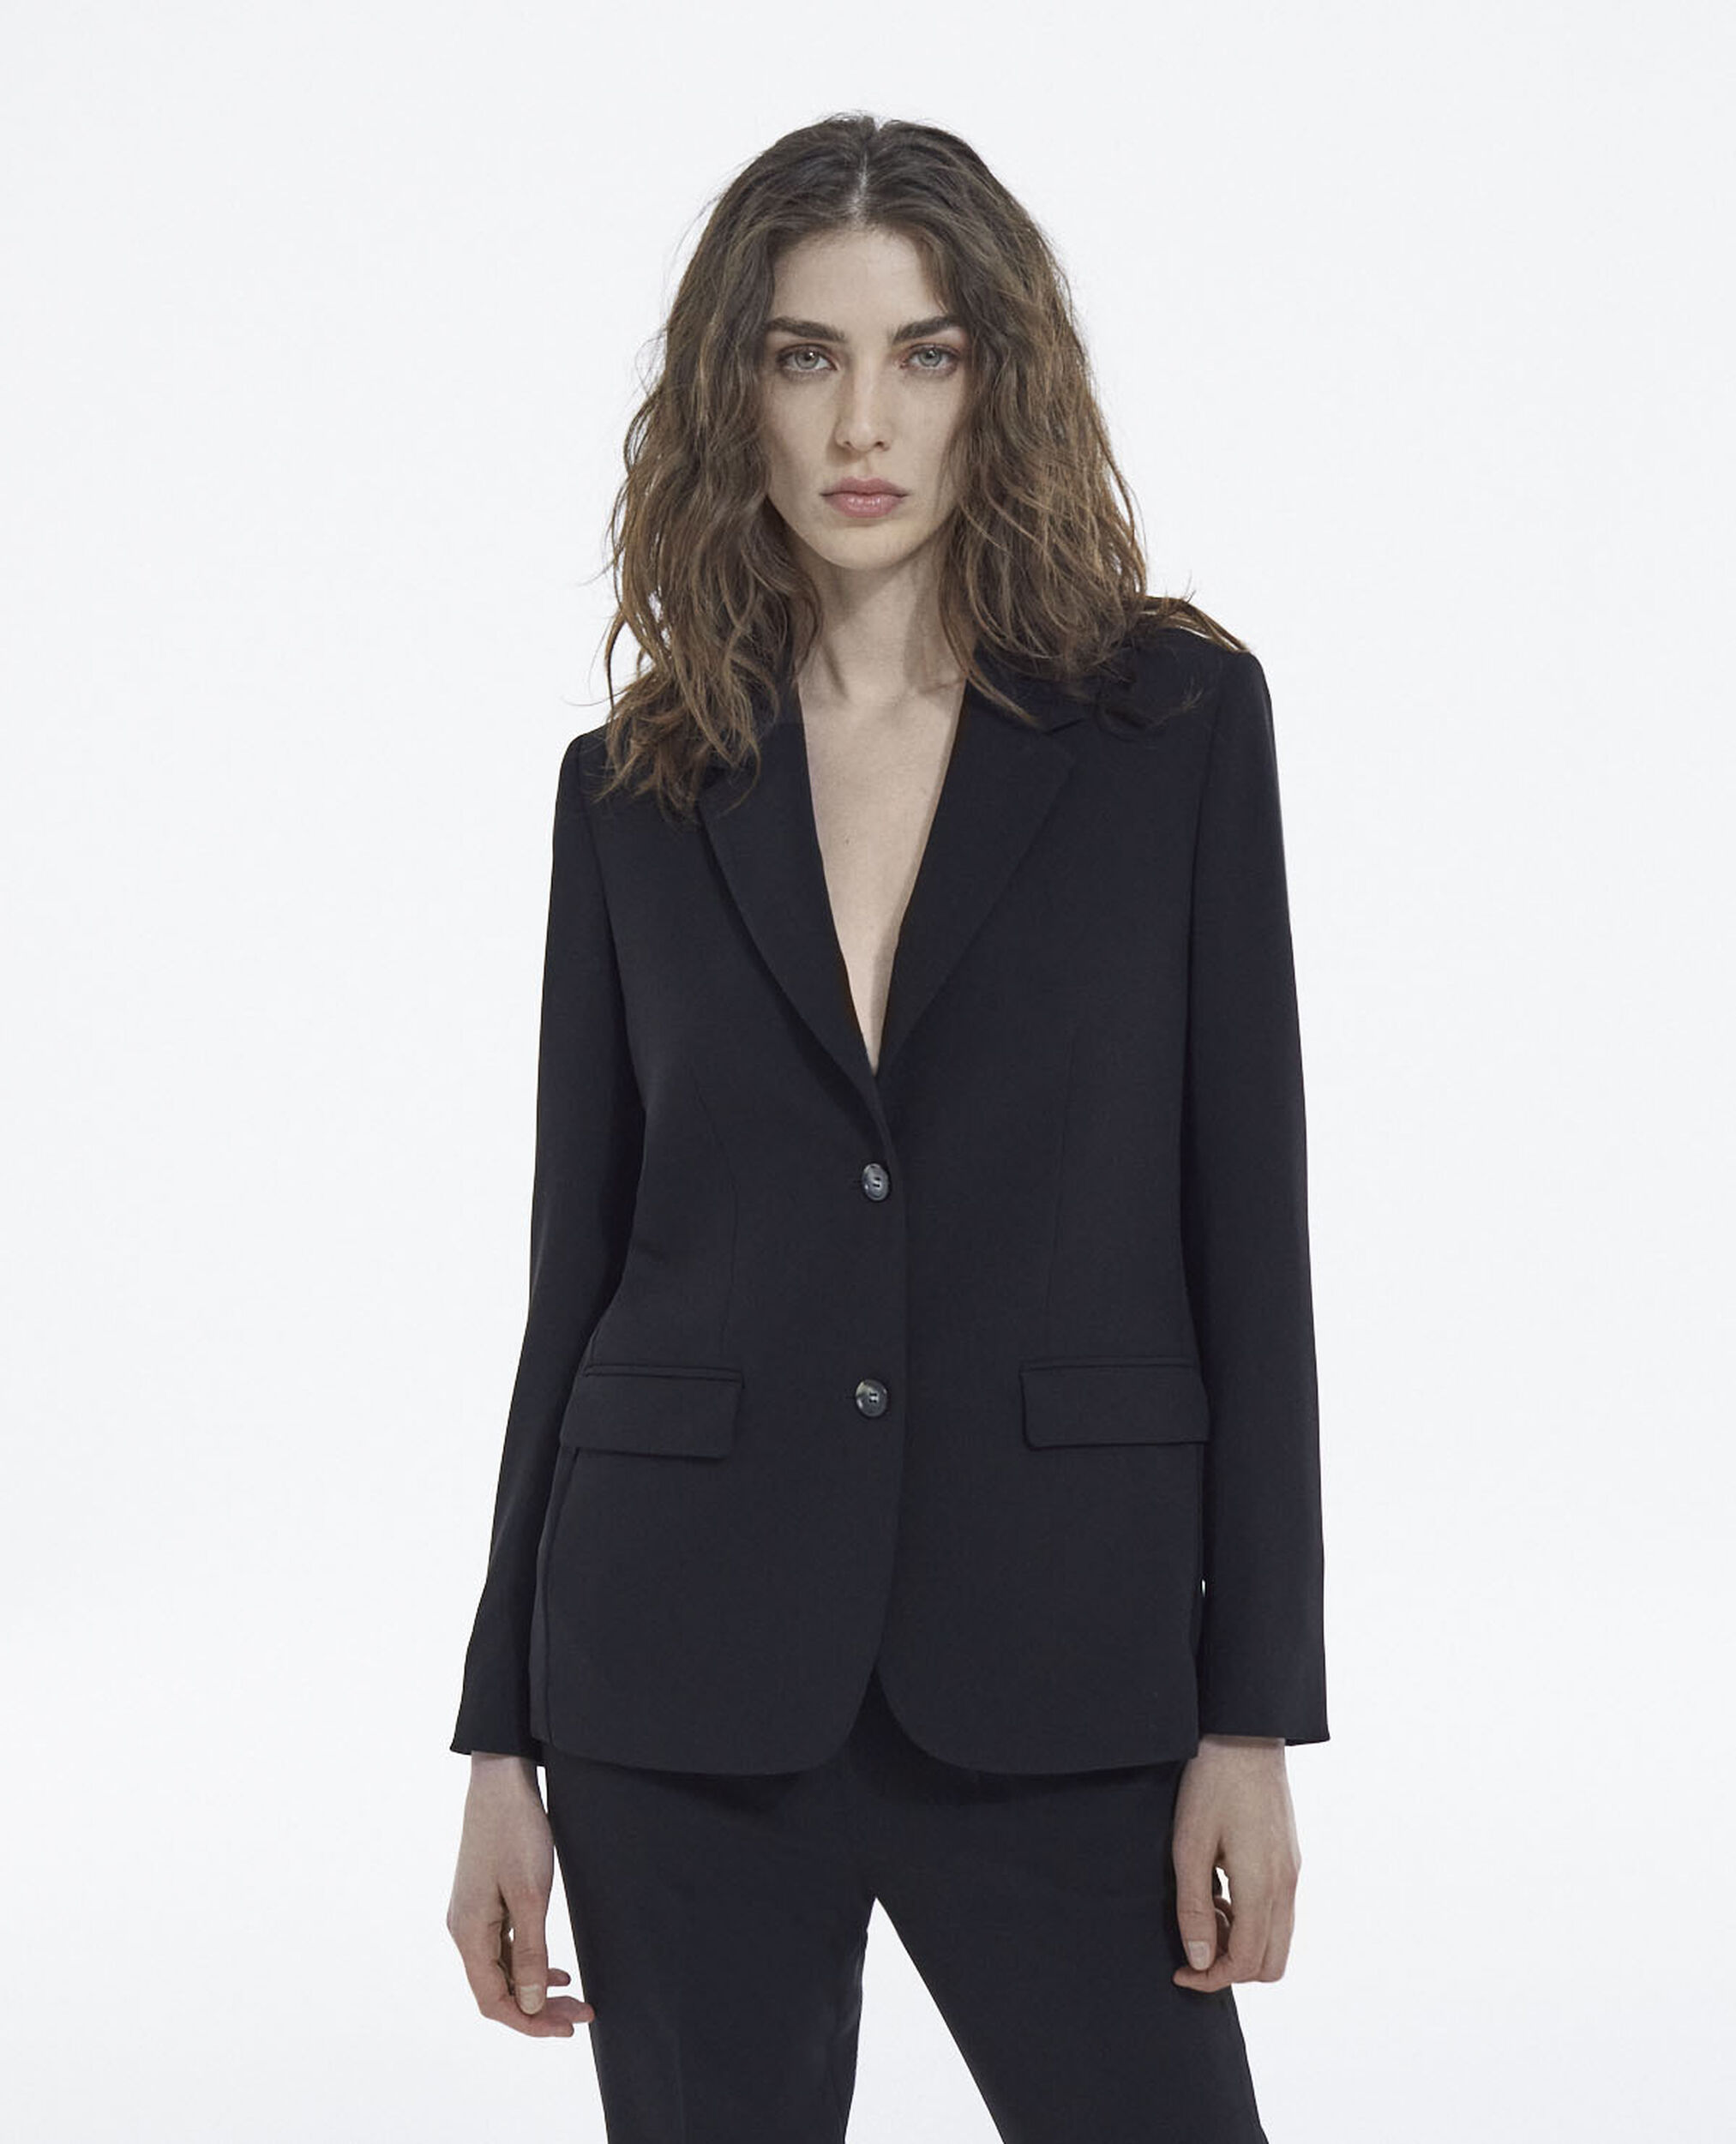 Flowing black jacket with two-button closure, BLACK, hi-res image number null